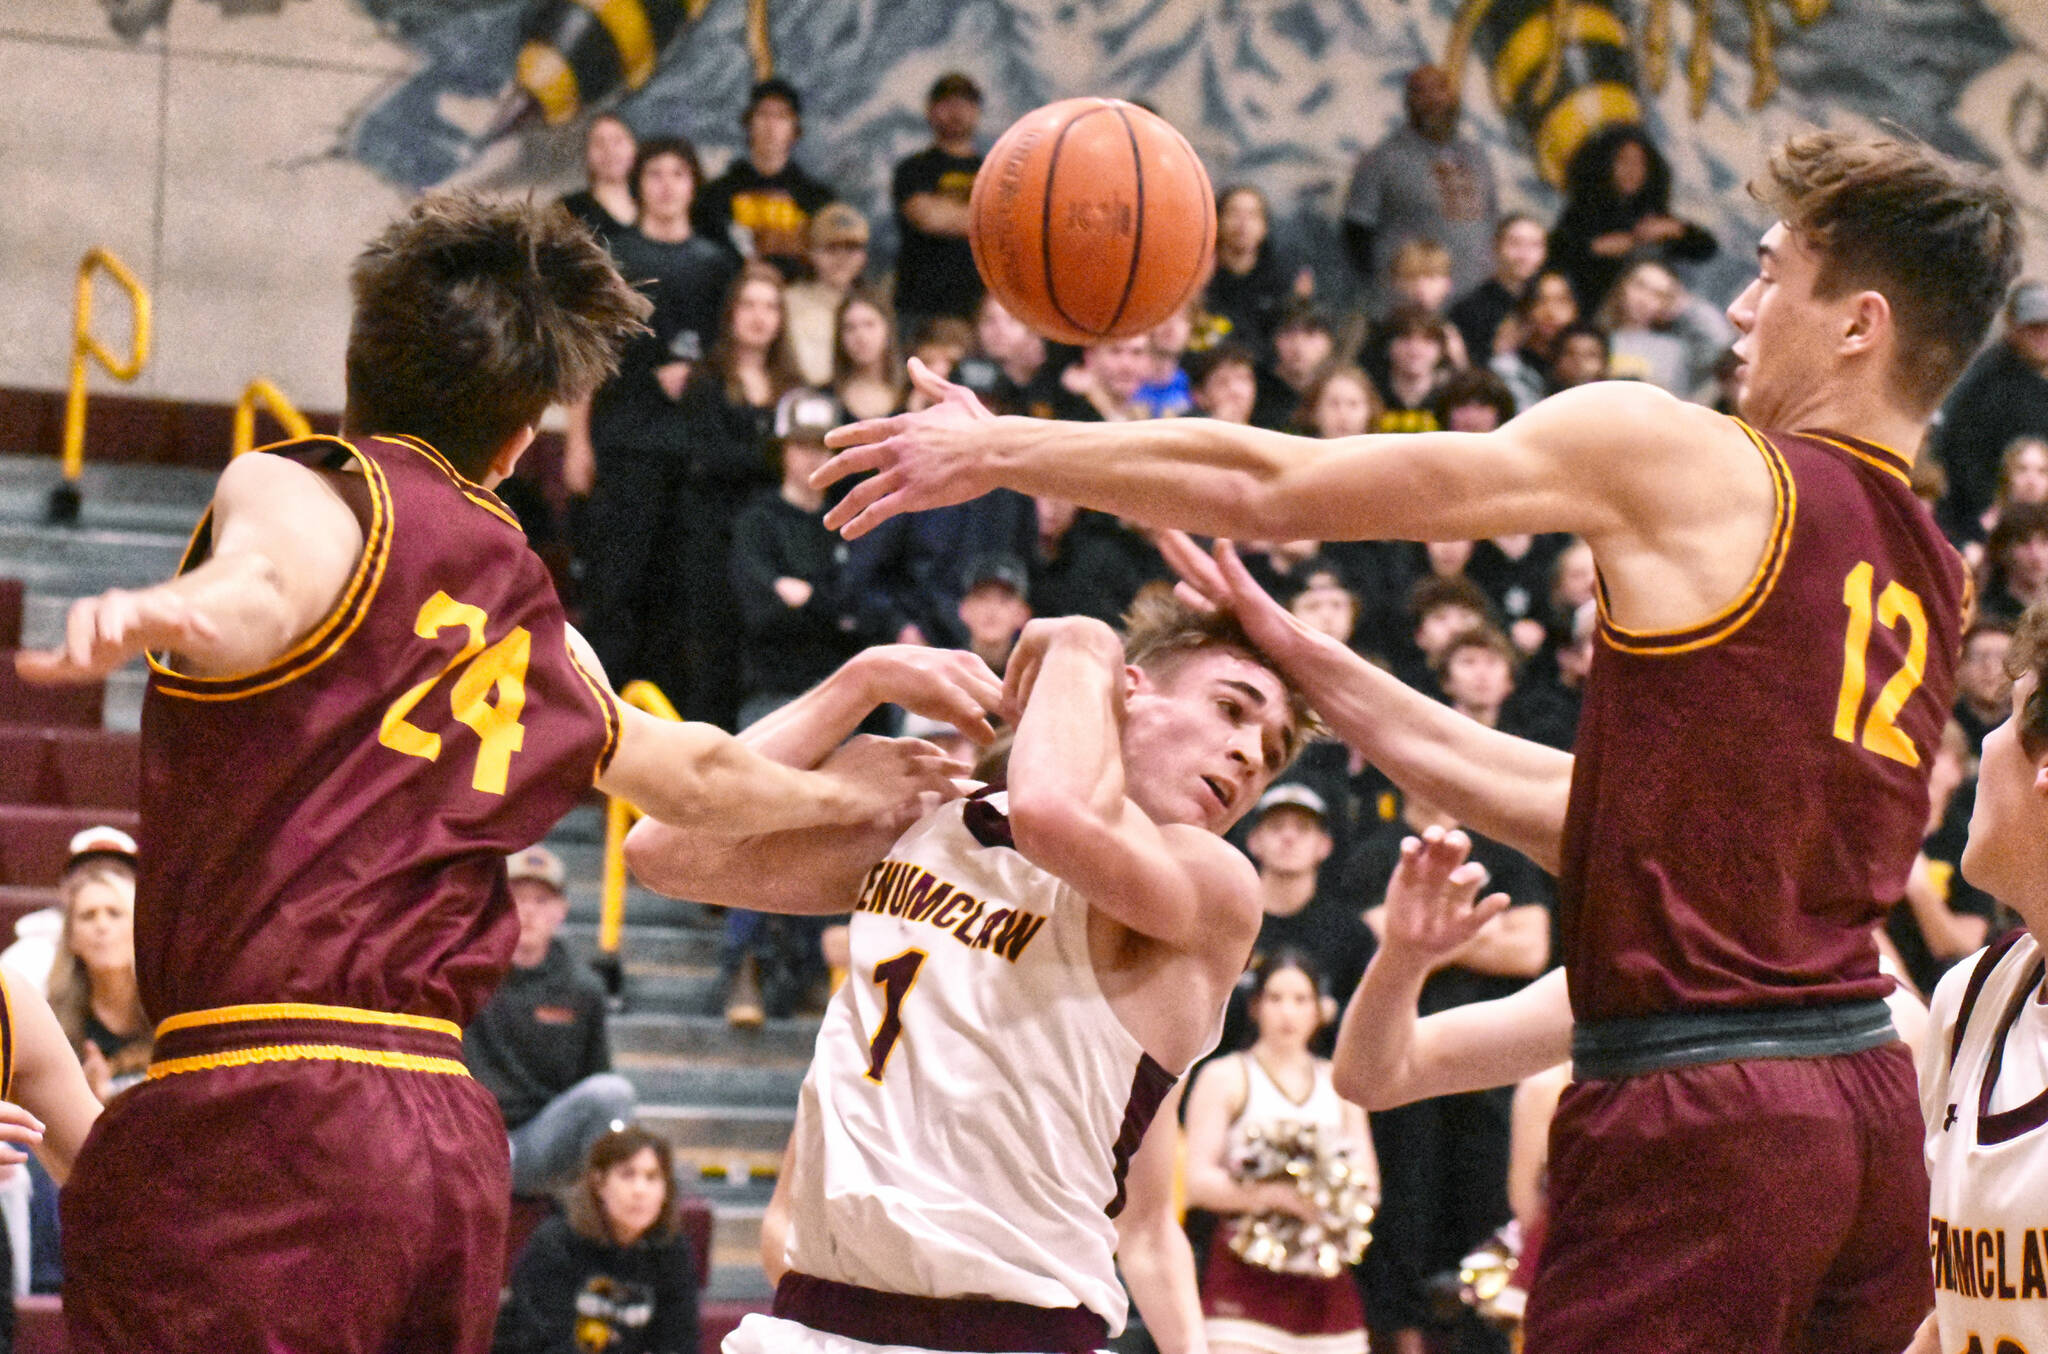 Scrambling for a loose ball during last week’s Battle of the Bridge game were Enumclaw’s Wyatt Neu (1) and White River’s Jace Marecle (24) and Sawyer Bloom (12). Photo by Kevin Hanson